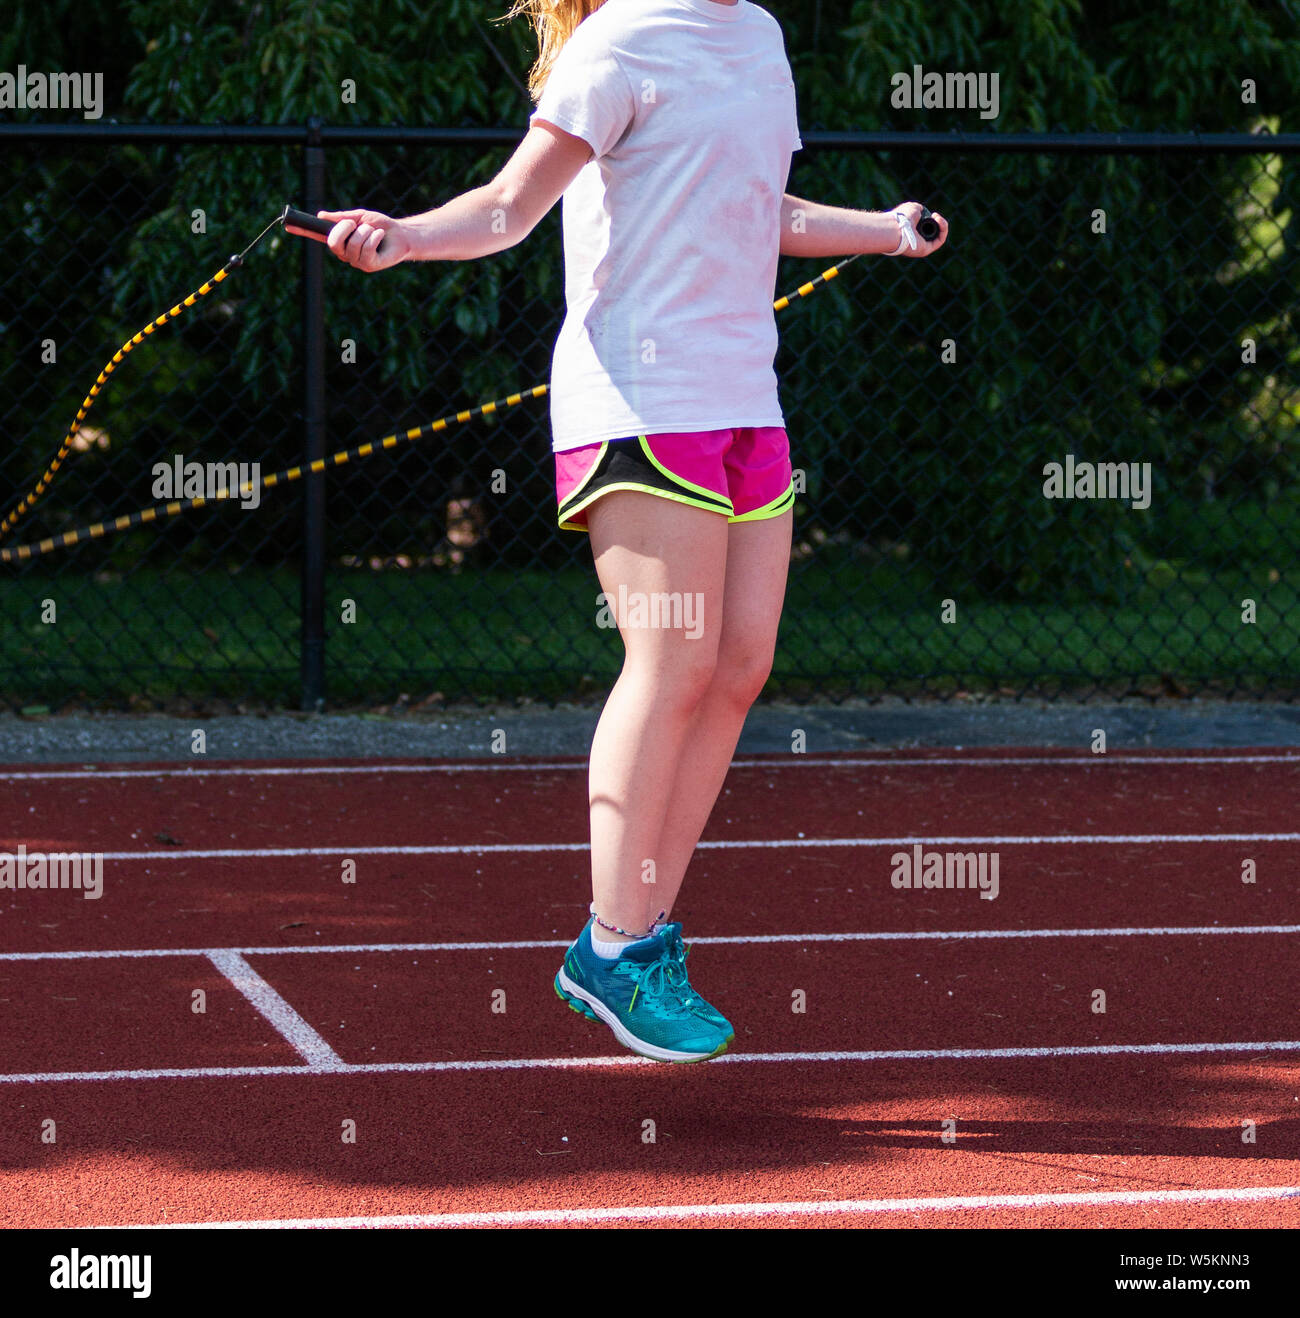 A high school runner is cross training using a black and white jump rope in the shade on the track during a warm practice. Stock Photo